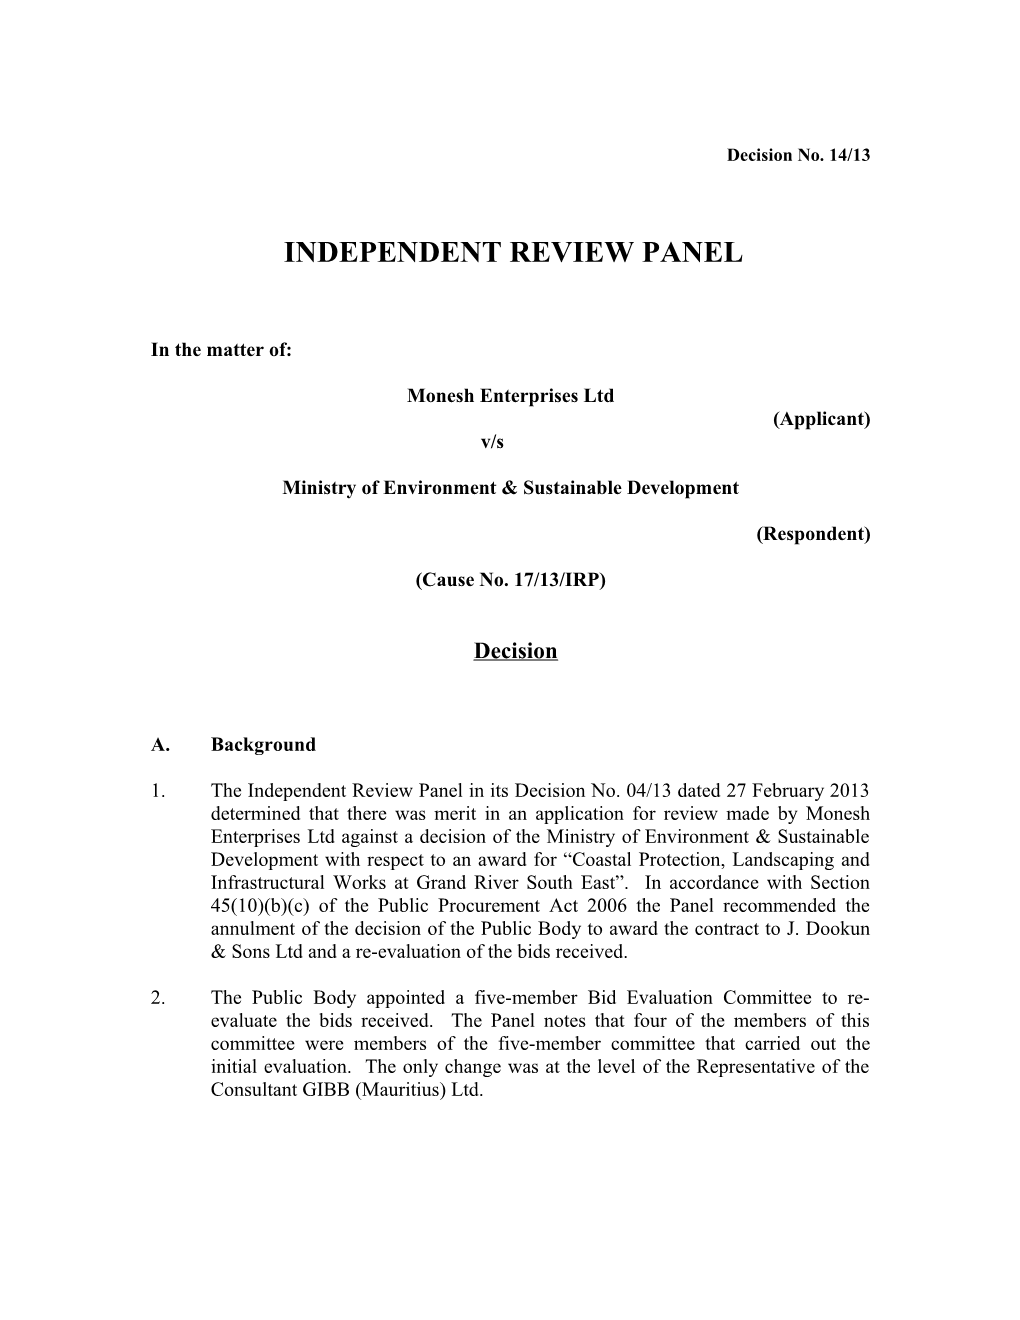 Independent Review Panel Decision No. 14/13